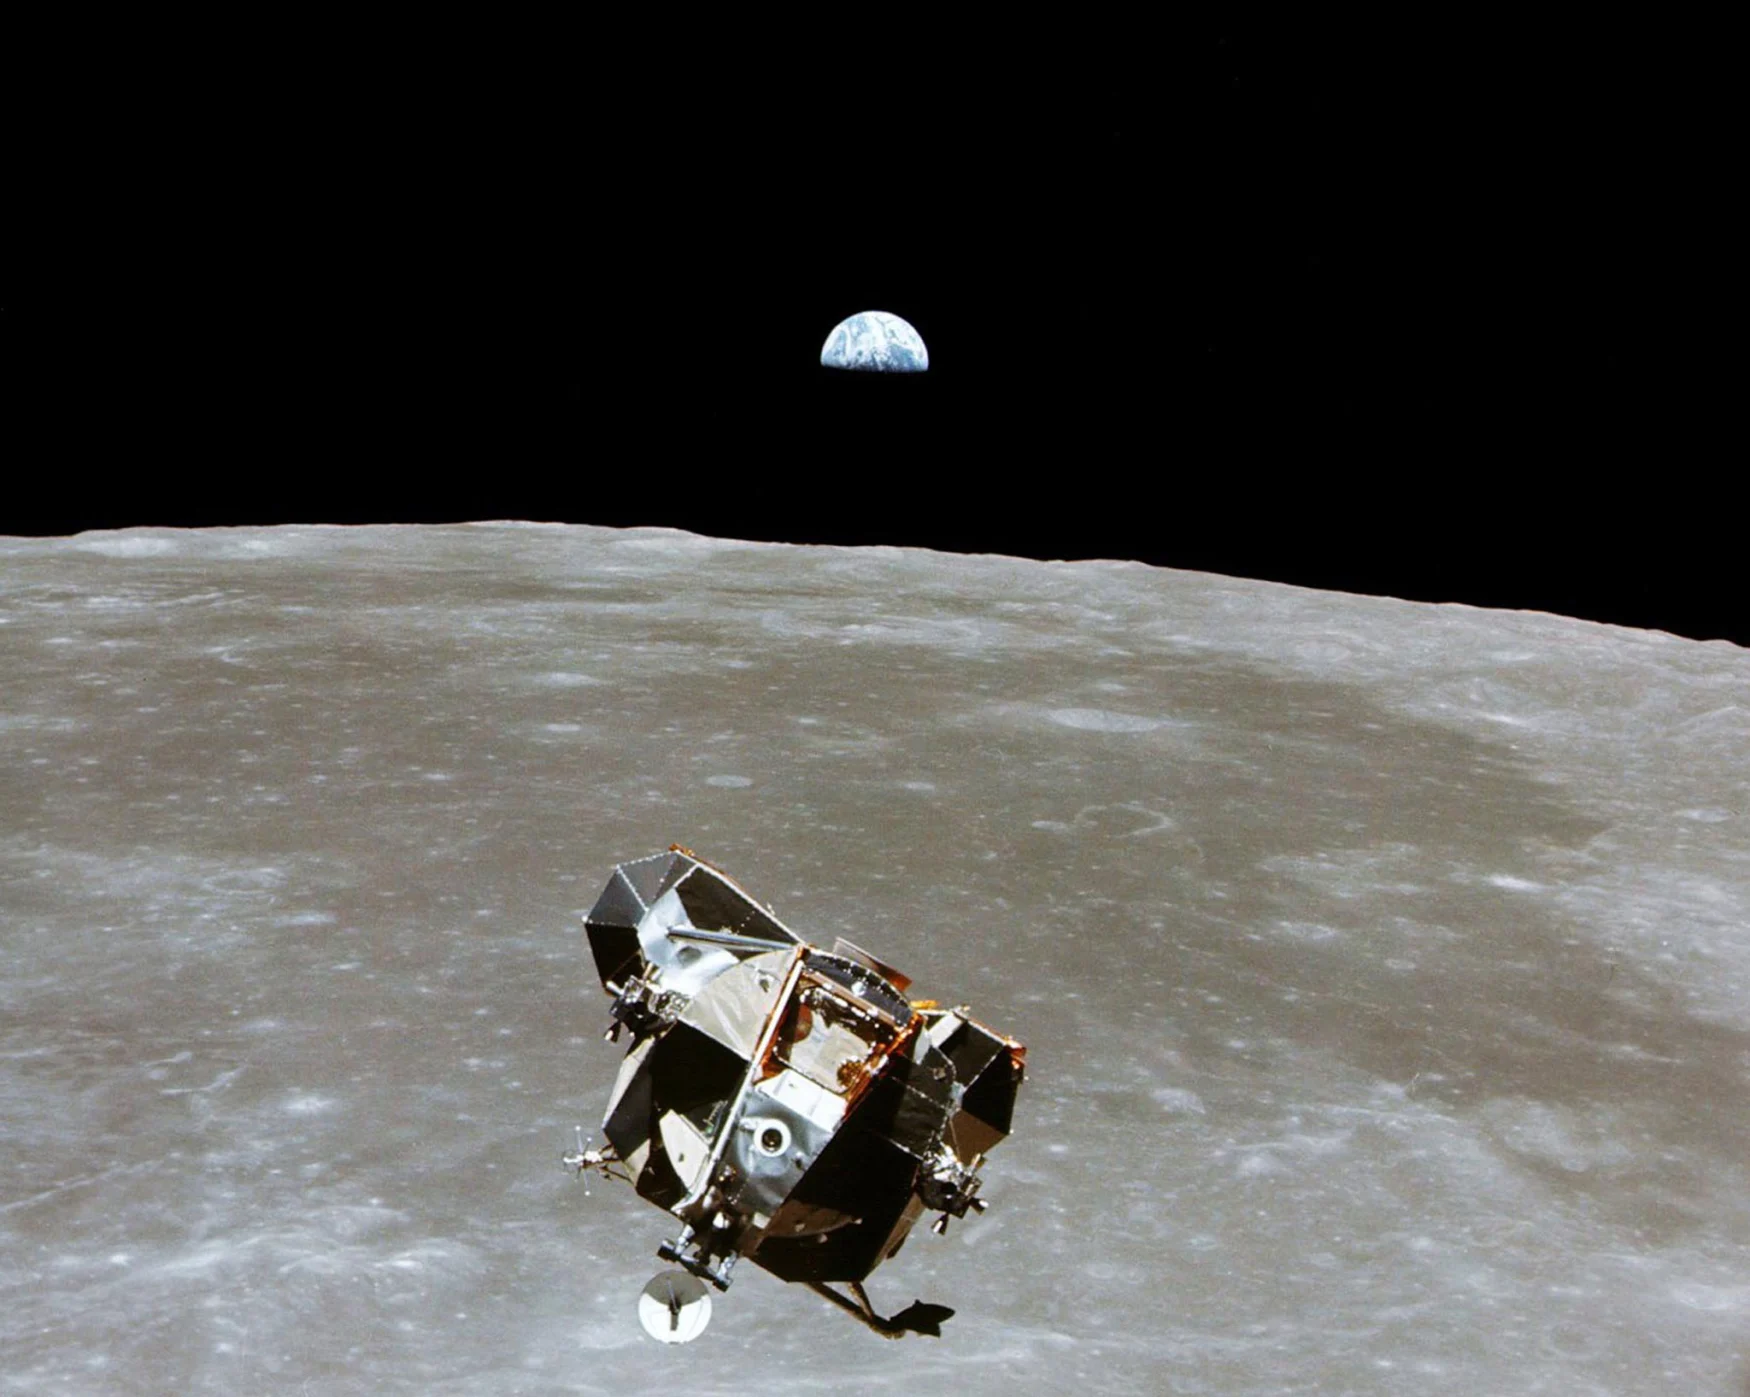 The Apollo 11 Lunar Module ascent stage, with astronauts Neil A. Armstrong and Edwin E. Aldrin Jr. aboard, is photographed from the Command and Service Modules in lunar orbit in this July, 1969 file handout photo. Astronaut Michael Collins, command module pilot, remained with the Command/Service Module in lunar orbit while Armstrong and Aldrin explored the Moon. The 30th anniversary of the Apollo 11 mission is July 16 (launch) and July 20 (landing on the moon). Michael Collins/NASA/Handout via REUTERS  ATTENTION EDITORS - THIS IMAGE WAS PROVIDED BY A THIRD PARTY. EDITORIAL USE ONLY